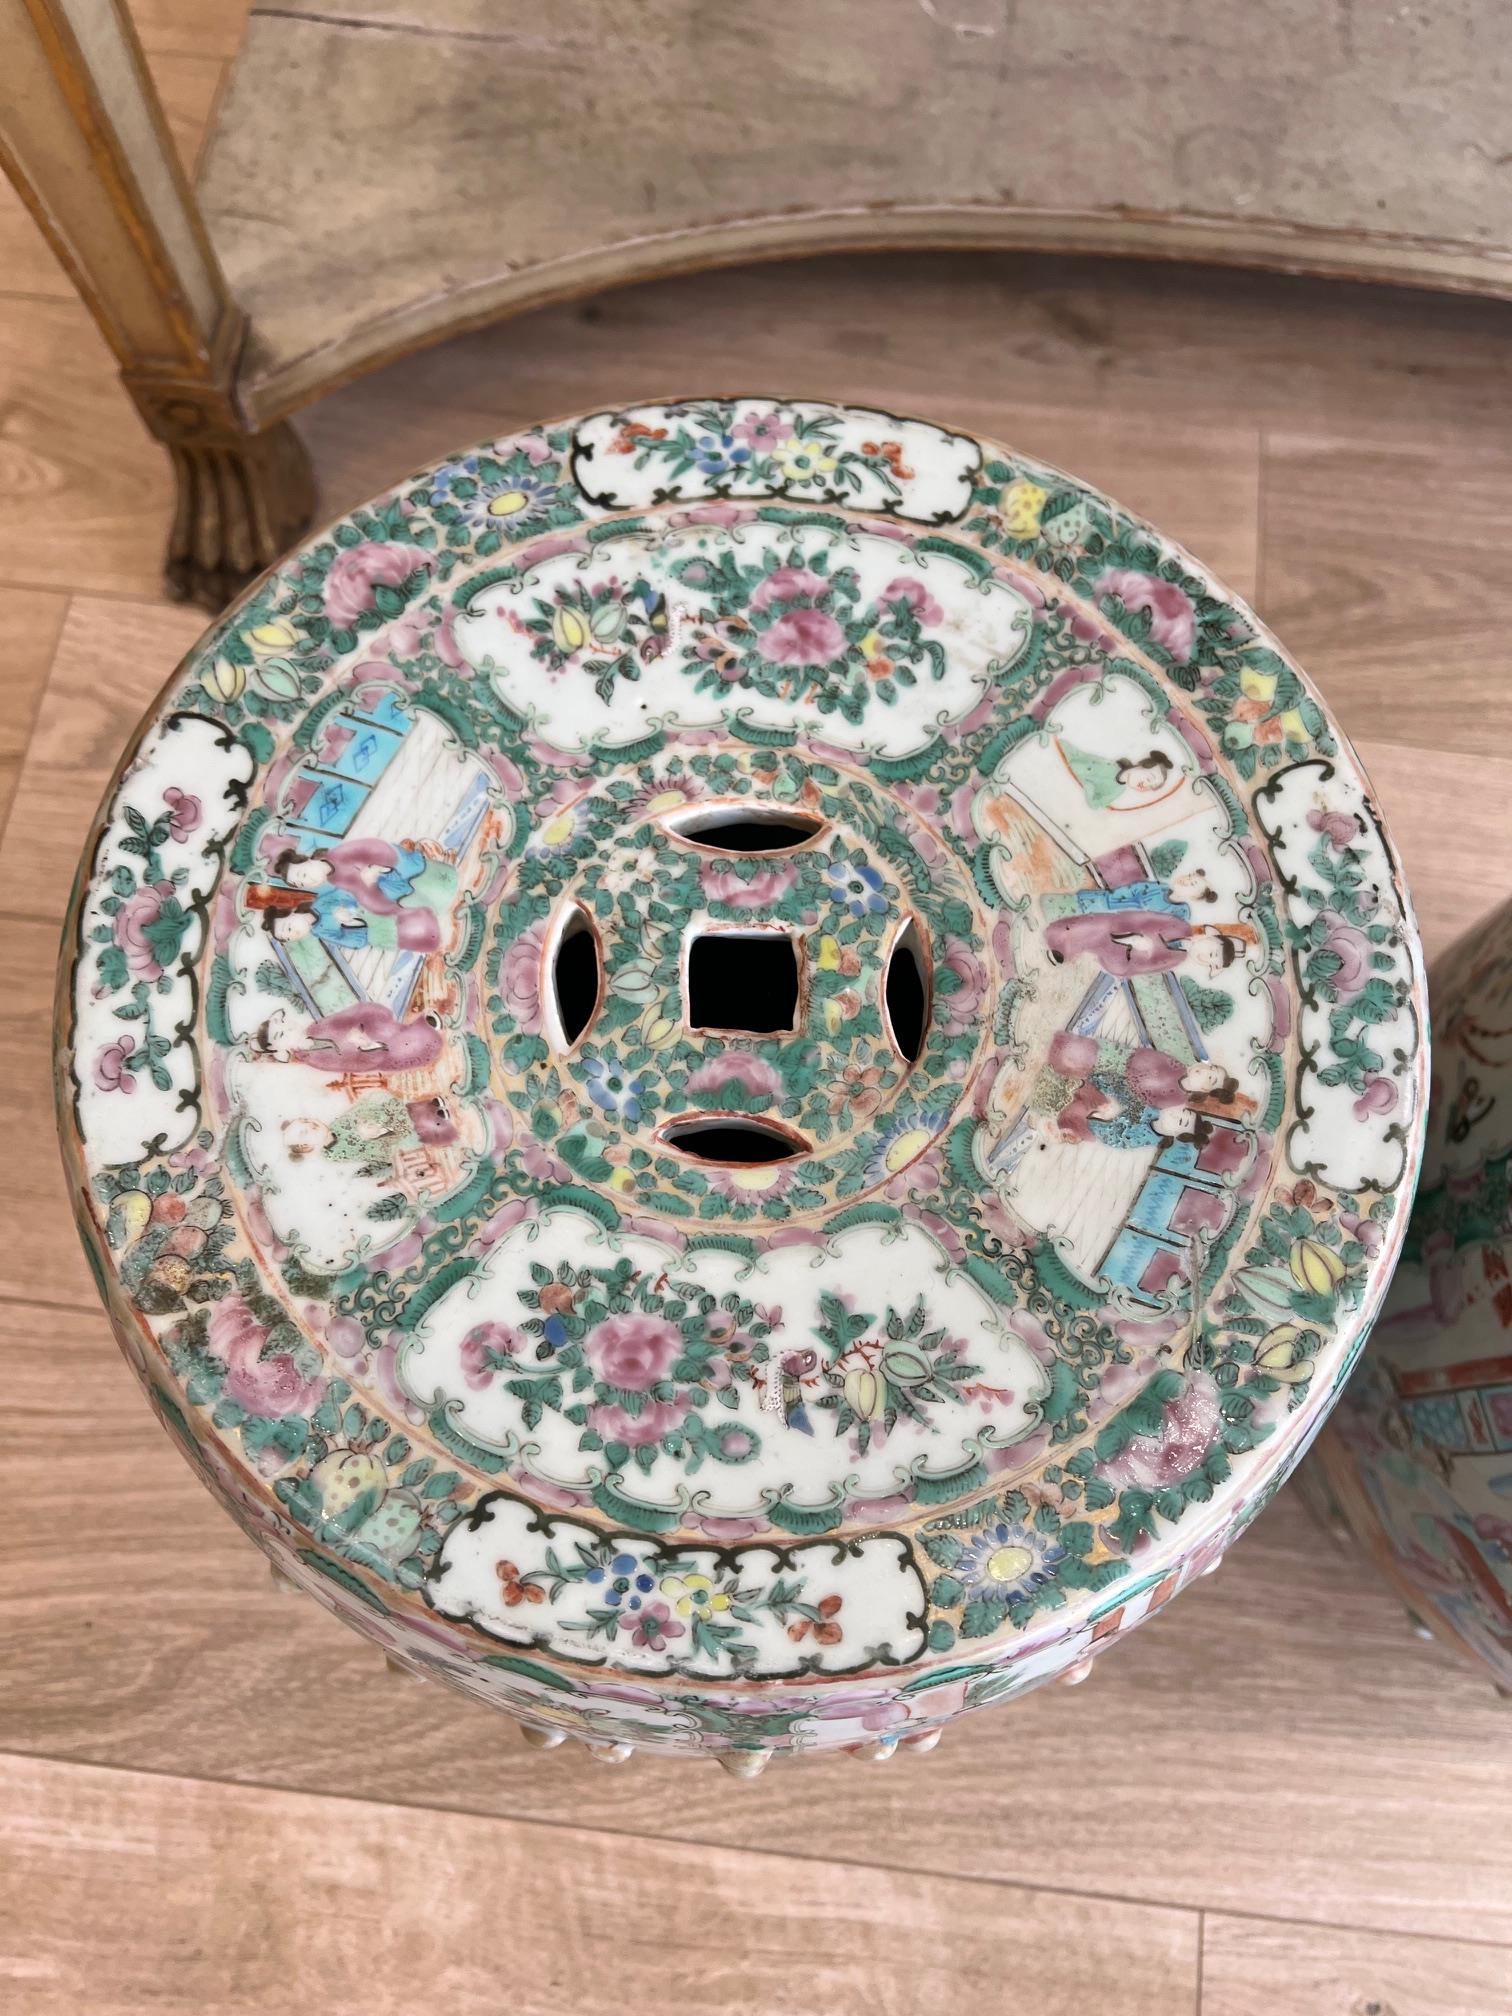 A PAIR OF 19TH CENTURY CHINESE FAMILLE ROSE PORCELAIN GARDEN SEATS - Image 9 of 12